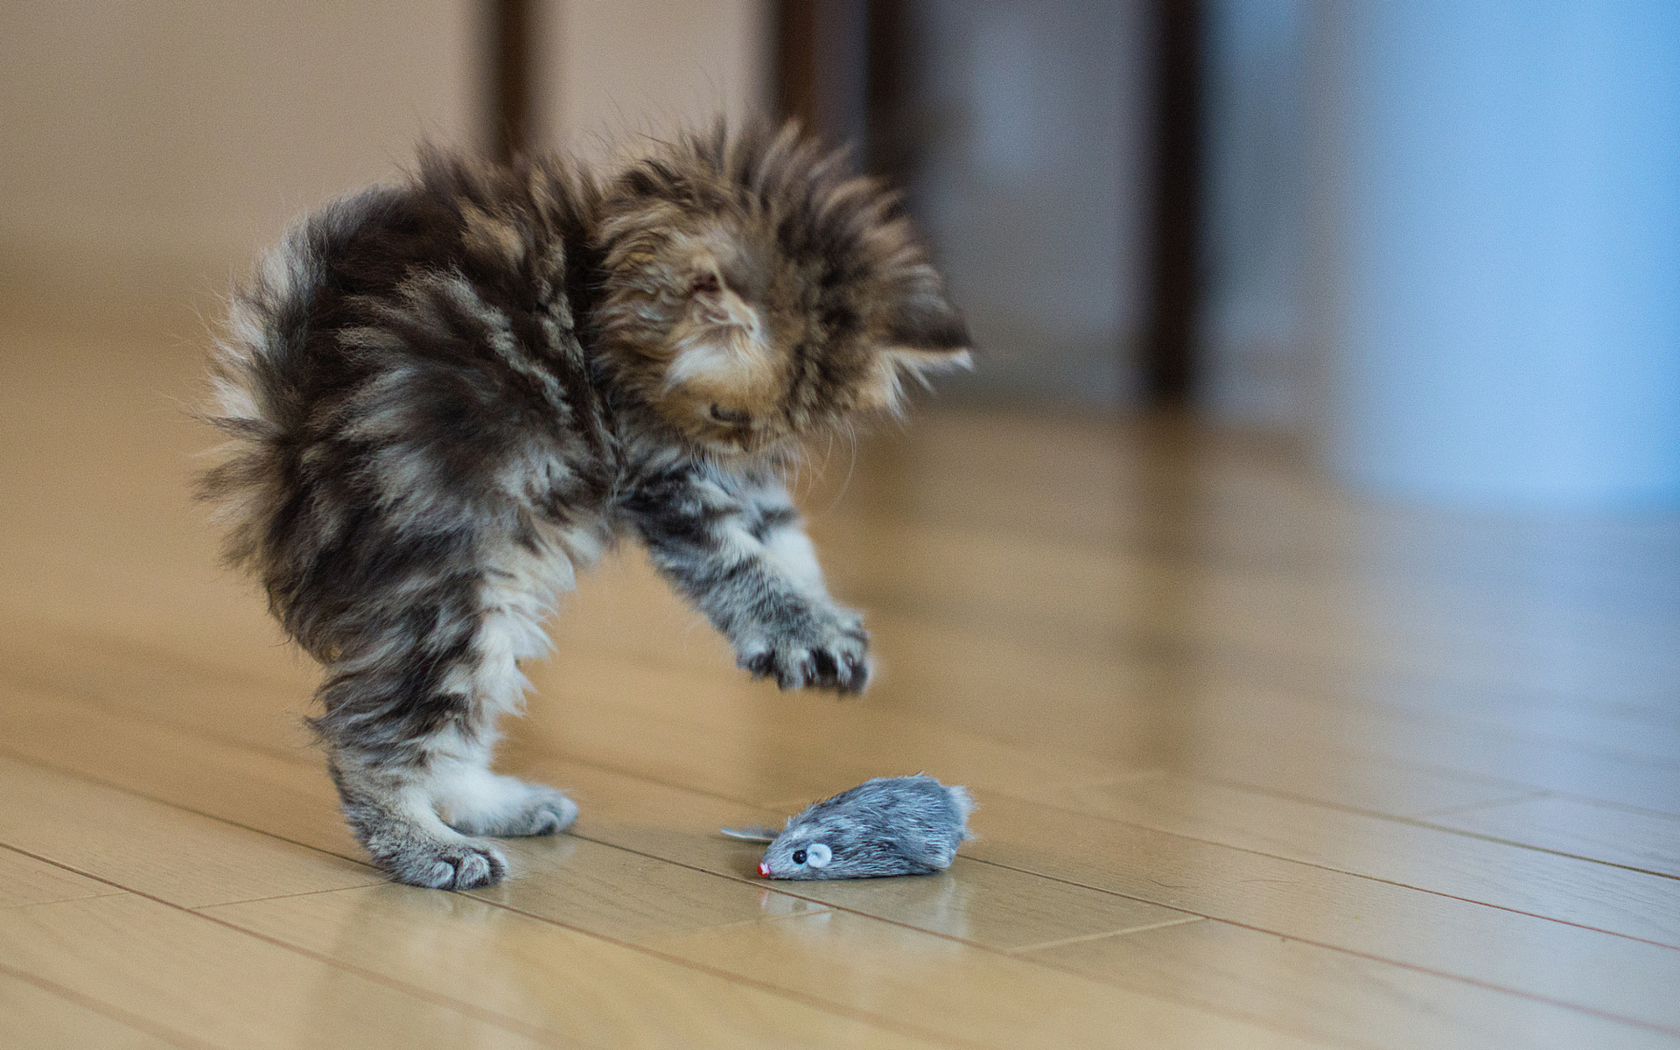 Funny Kitten Playing With Toy Mouse screenshot #1 1680x1050